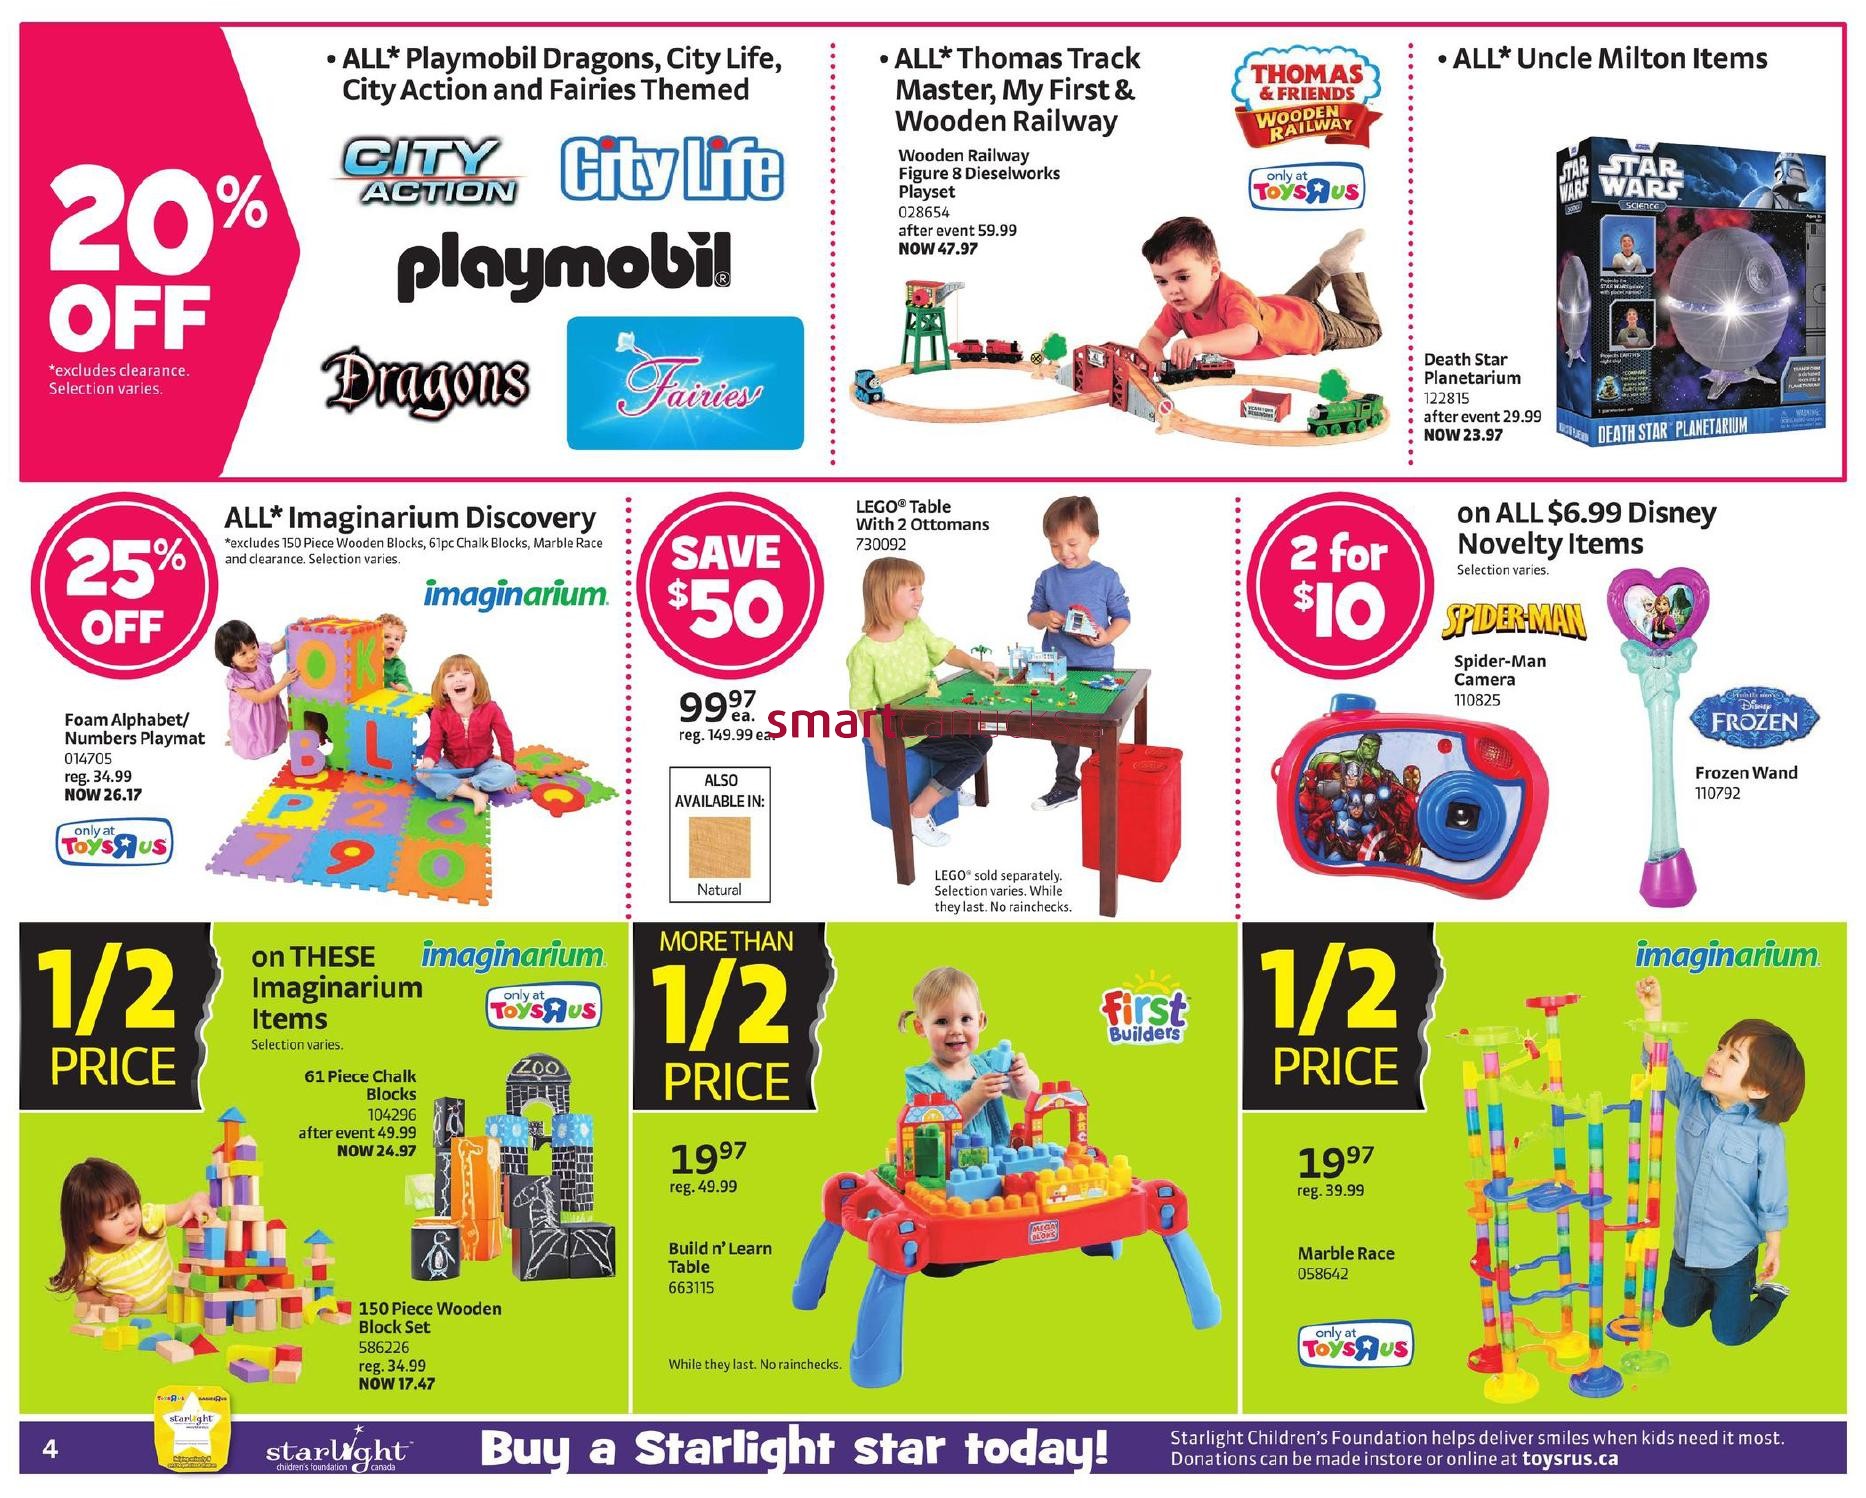 Toys R Us Black Friday Canada 2014 Flyer, Sales and Deals! › Black - Will Toys R Us Black Friday Deals Be Available Online